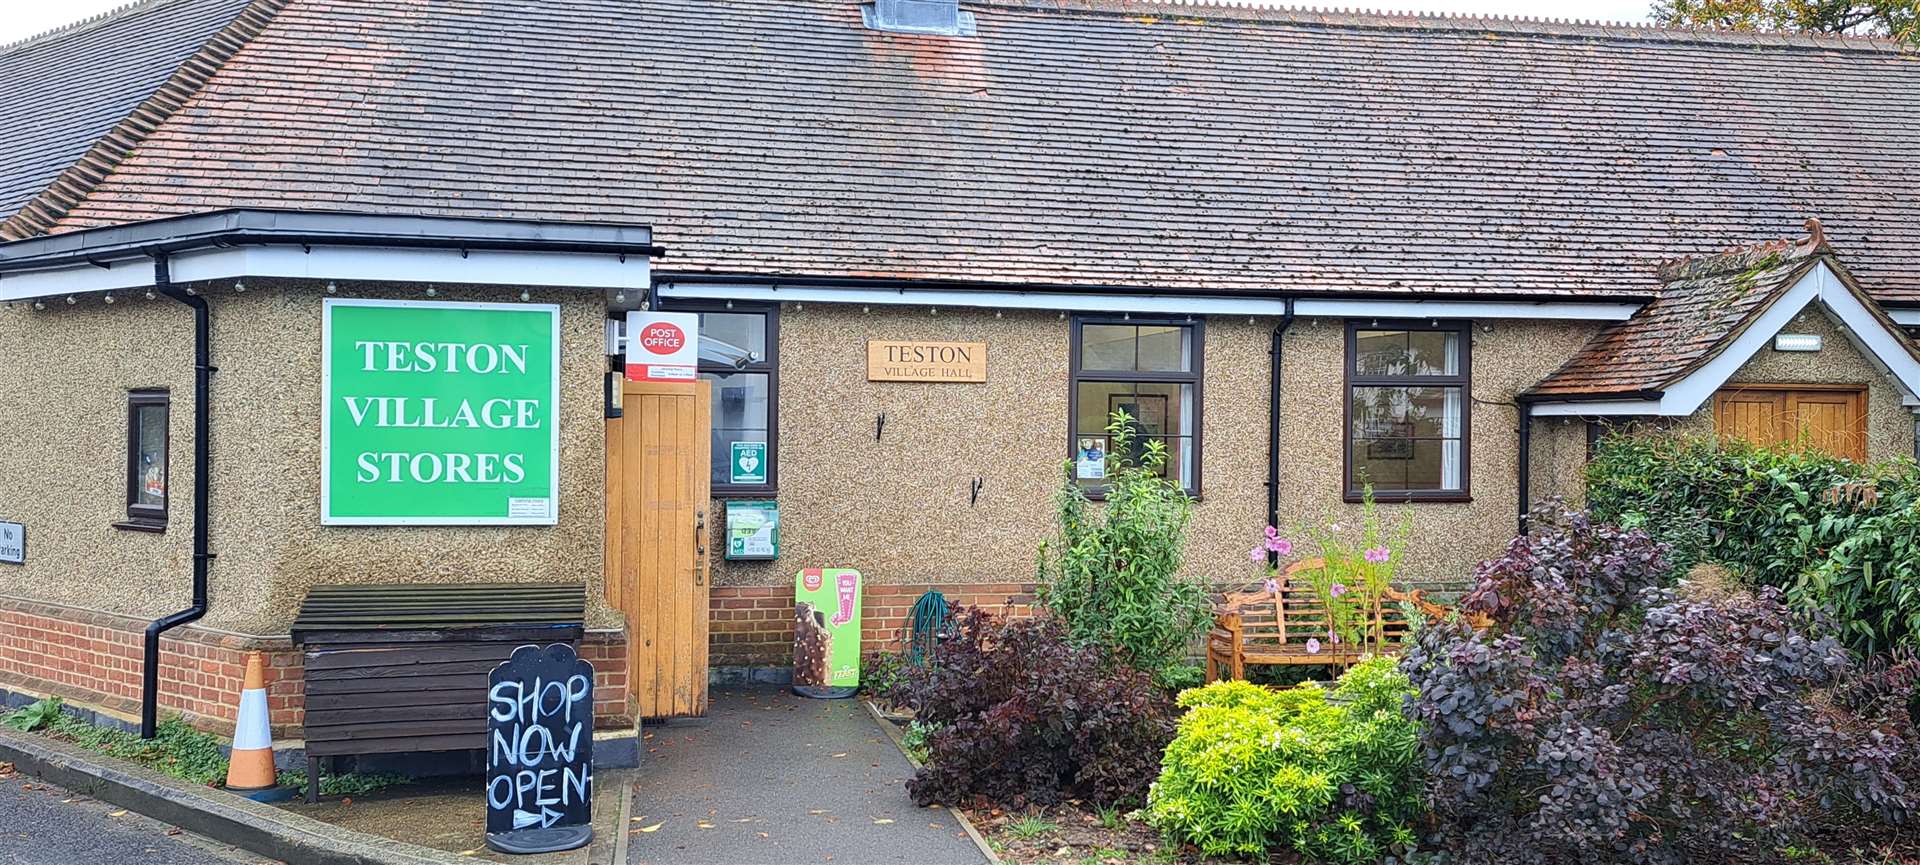 The hall hosts the village preschool and community store